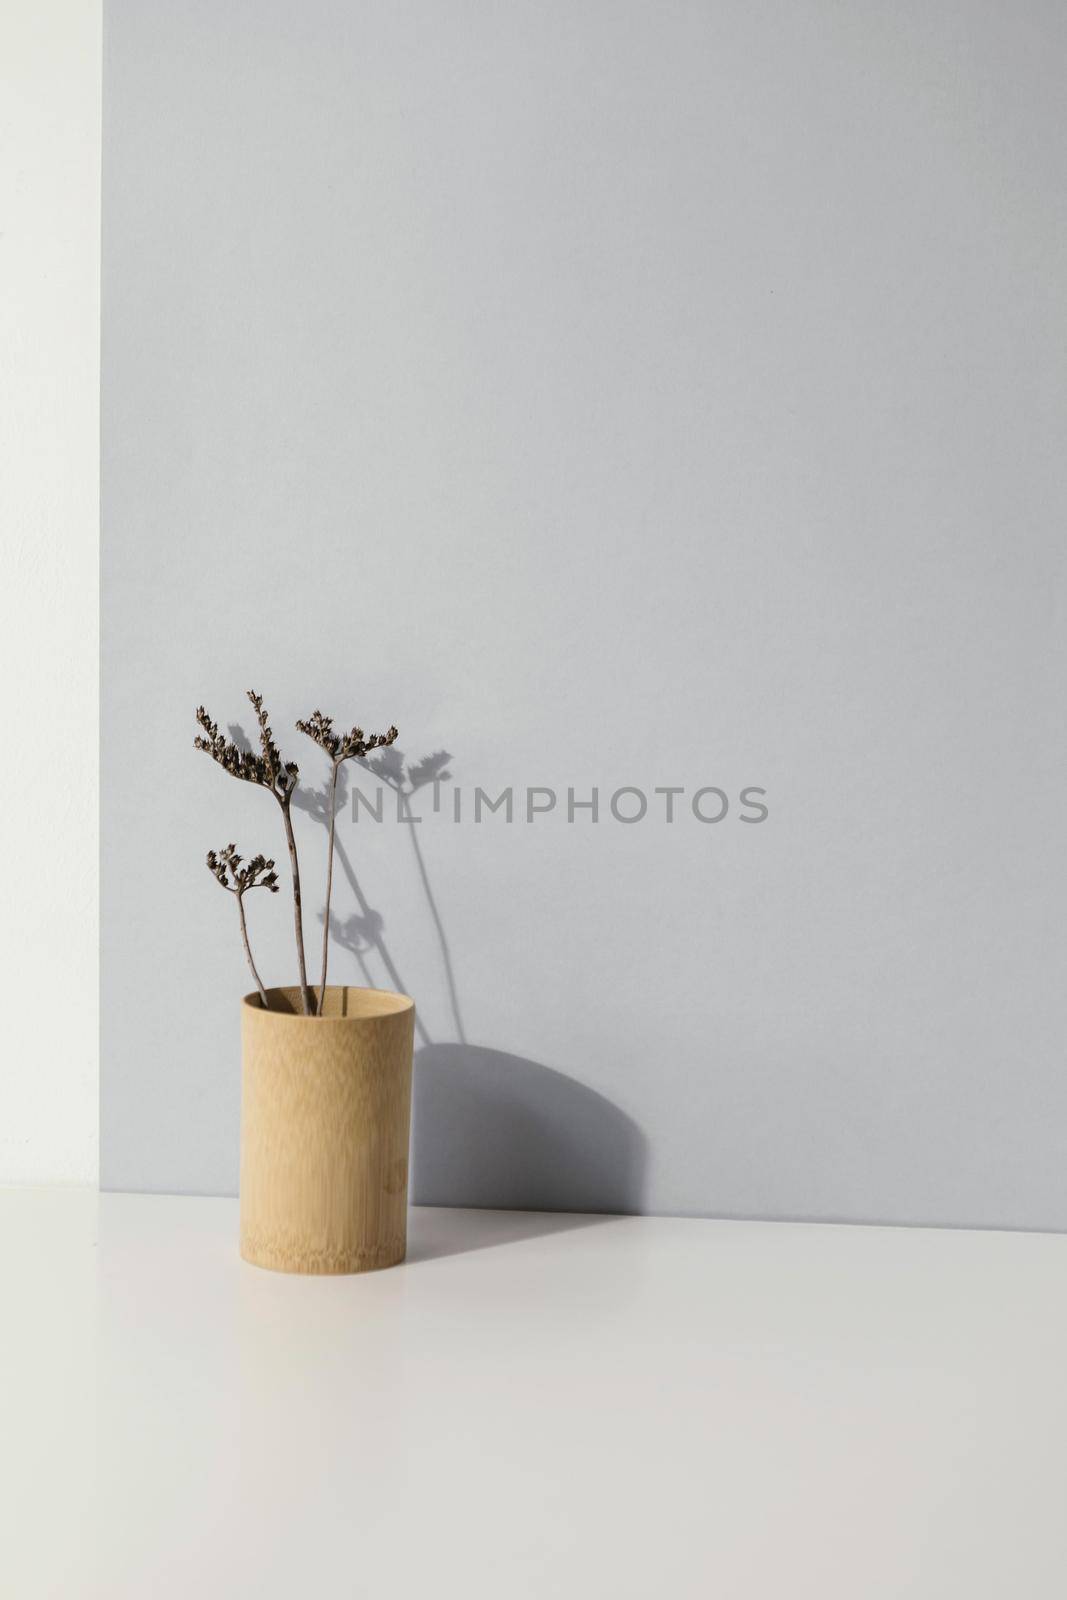 abstract minimal plant vase copy space. High quality beautiful photo concept by Zahard